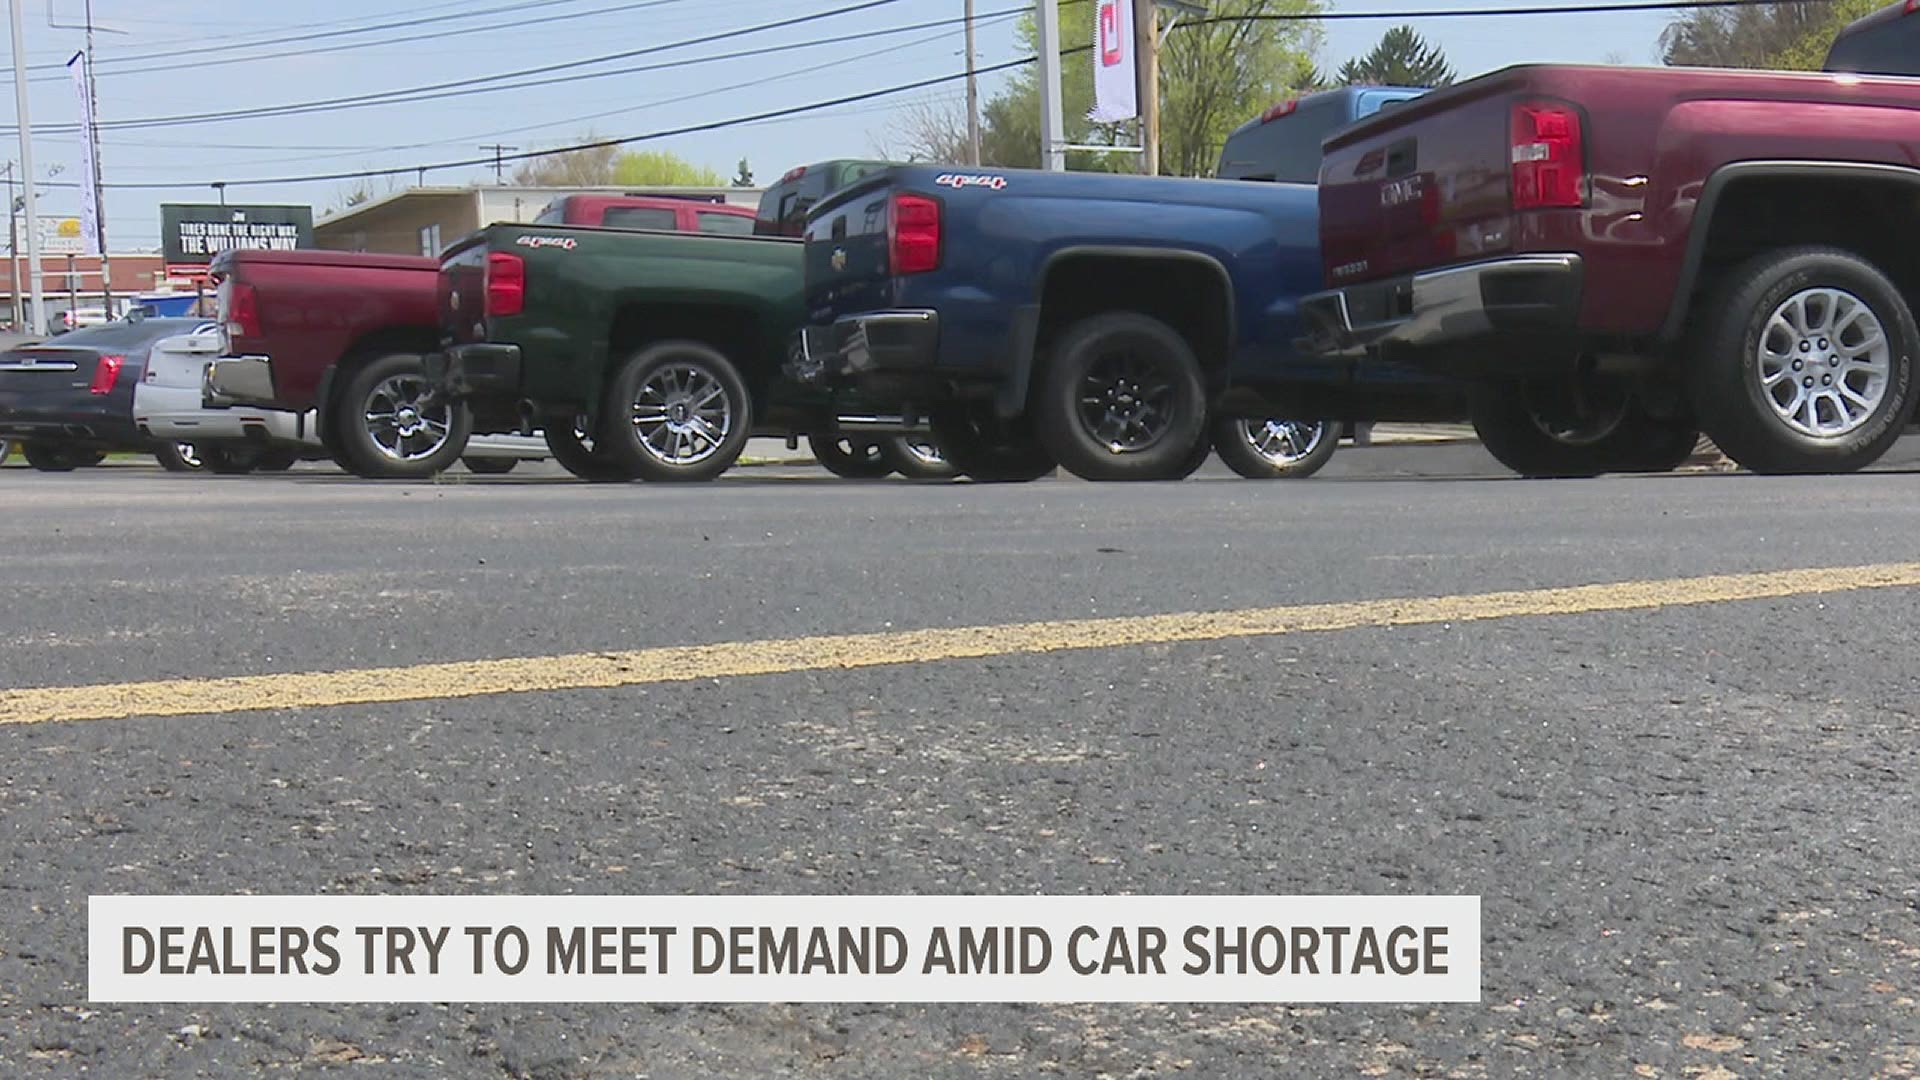 "Dealerships, ourselves included are at or less than a 30 day supply," said Giambalvo.